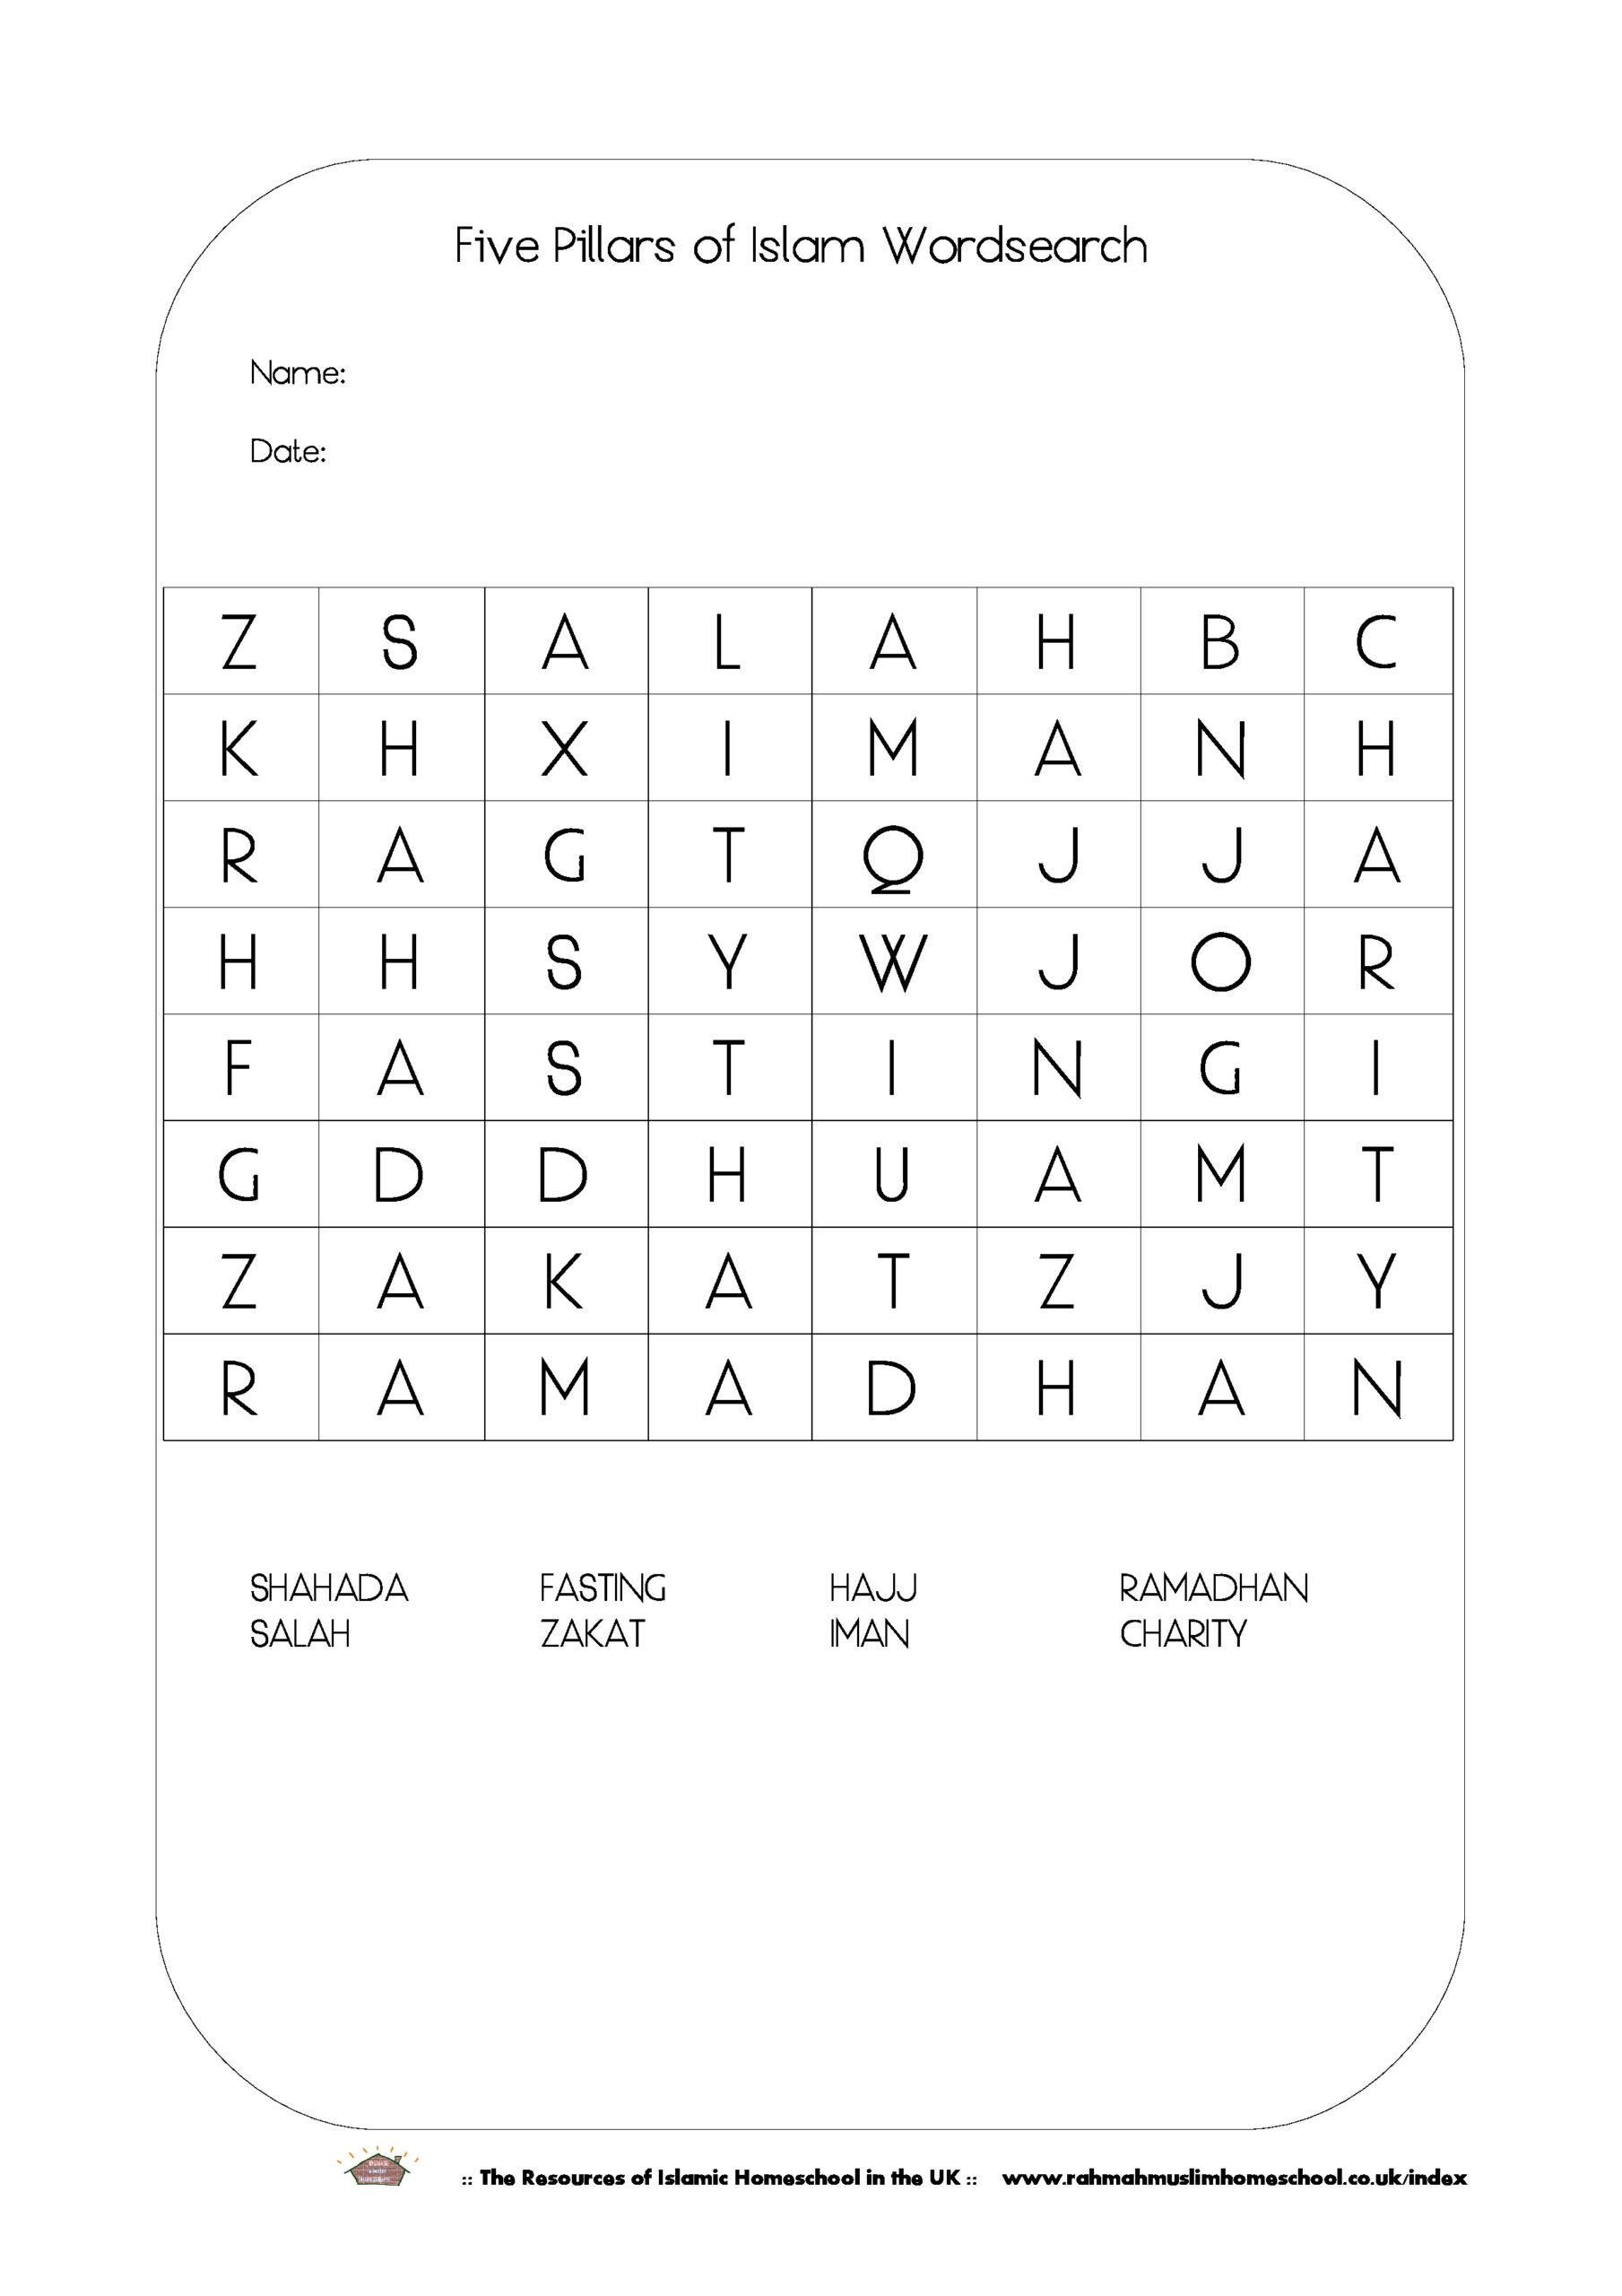 FREE Ramadhan Activities The Five Pillars Of Islam Wordsearch The 